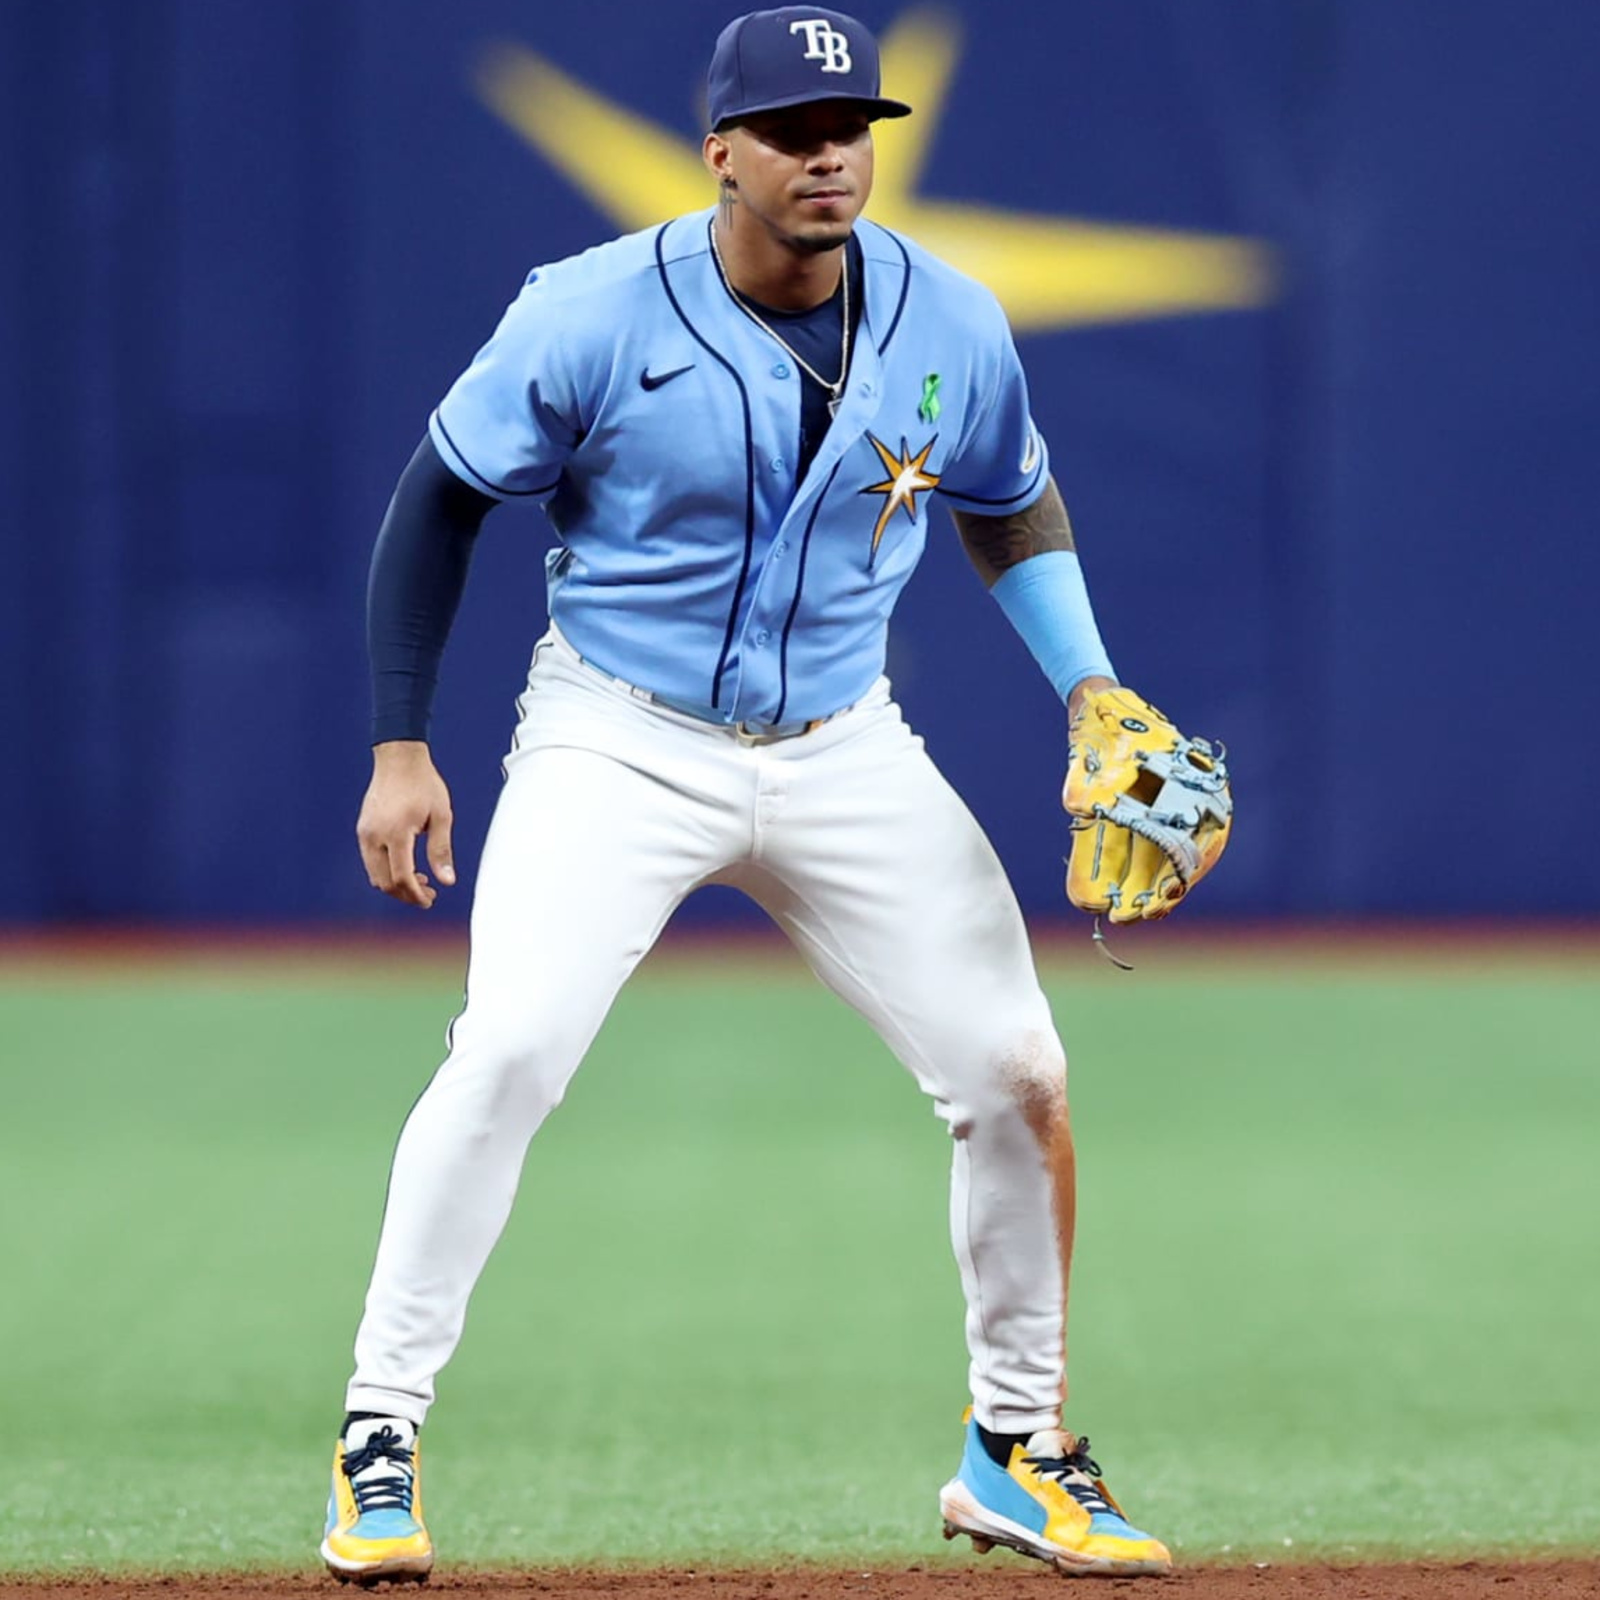 Rays' Wander Franco has $650K worth of jewelry stolen from car